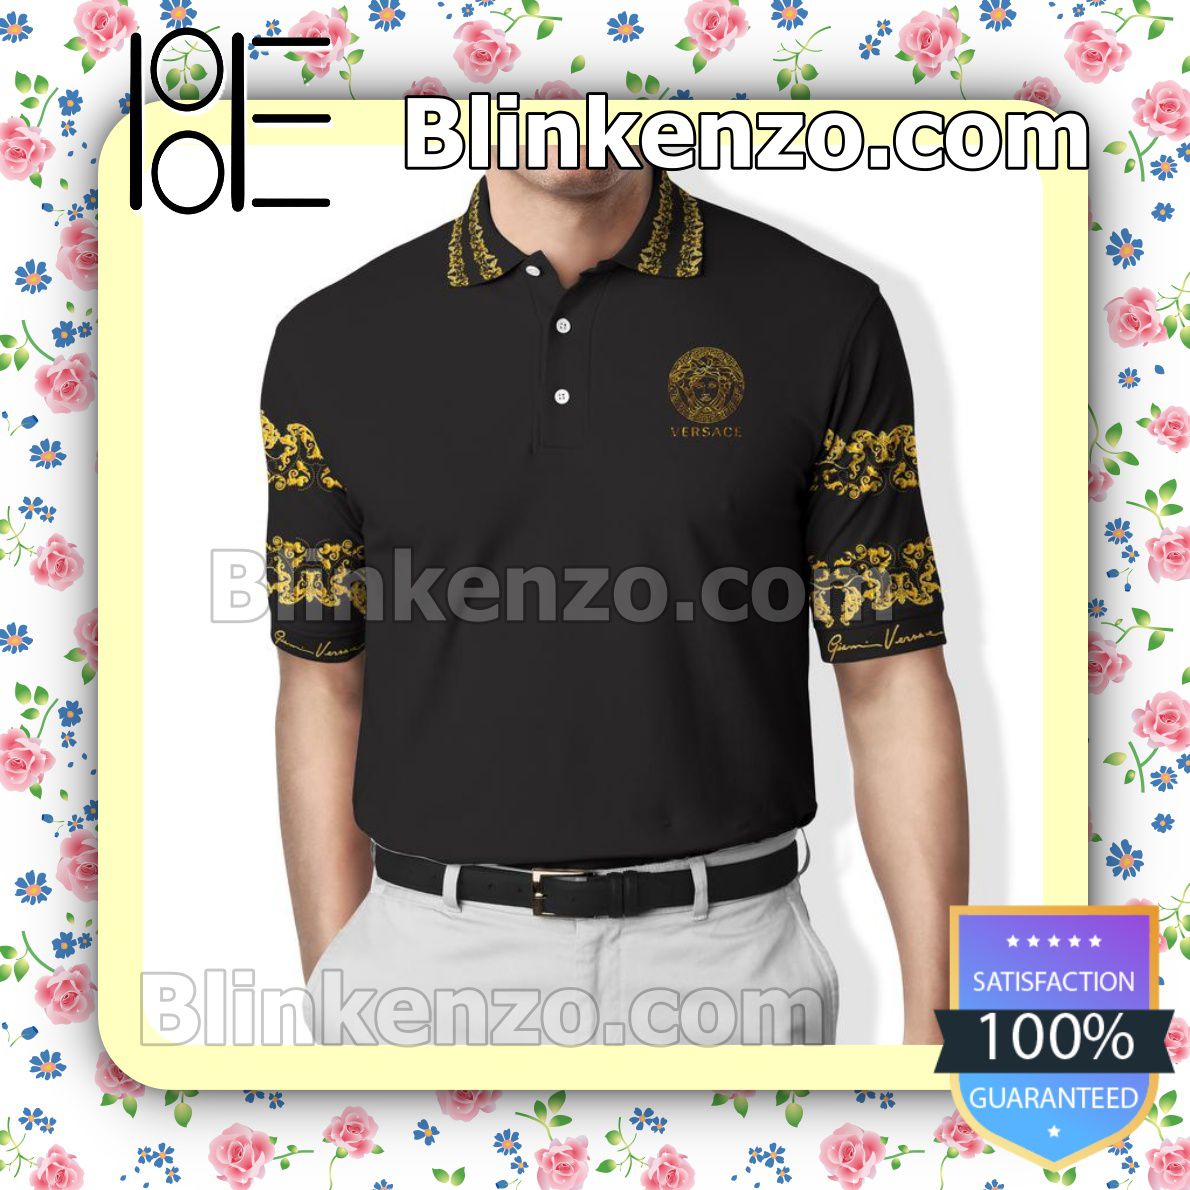 Wereldrecord Guinness Book Spin band Gianni Versace Luxury Brand Black Embroidered Polo Shirts - Blinkenzo